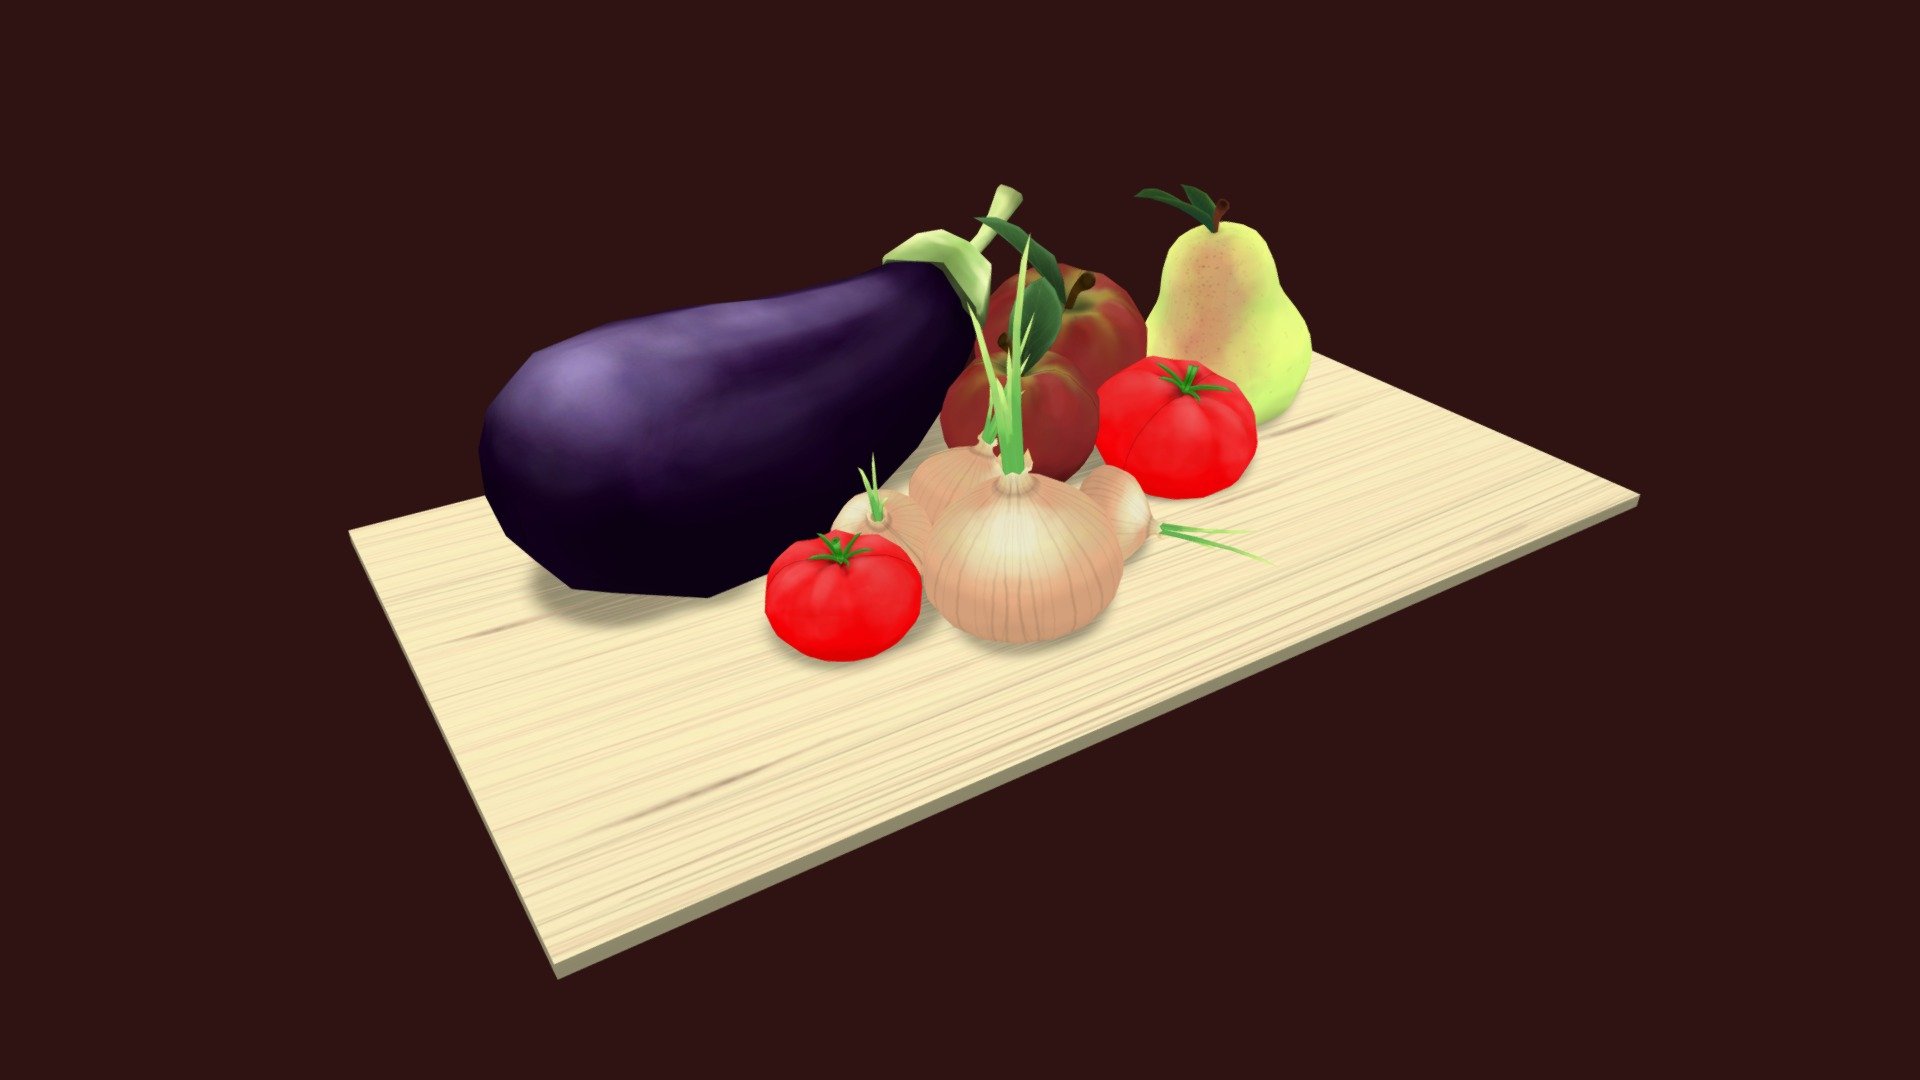 Assorted, handpainted fruit &amp; vegetables (5).




apple

pear

eggplant

tomato

onion

Handpainting (diffuse) exercise for college.
Lowpoly. UV unwrapped. 2048 x 2048 diffuse maps (+1 for cutting board).
Blender 3d model